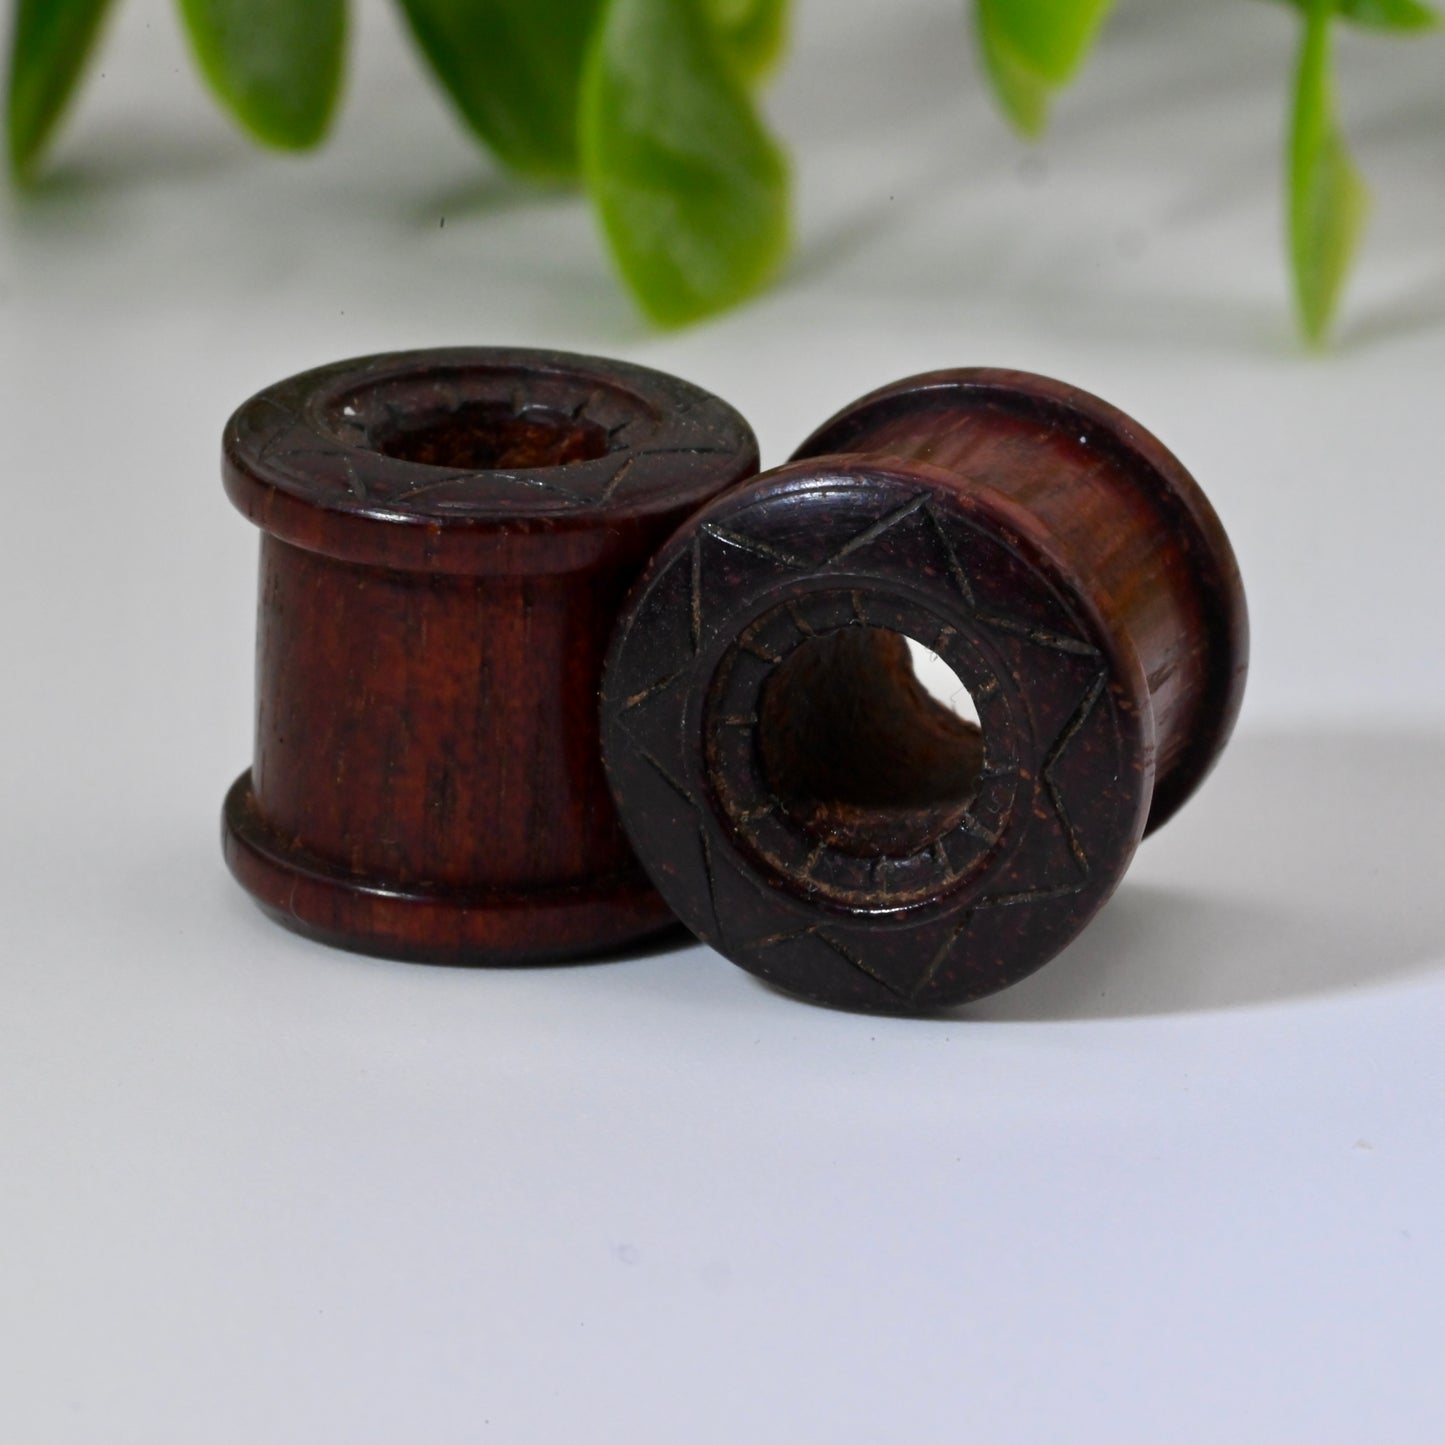 Tiered Double Spool Plugs - Pair